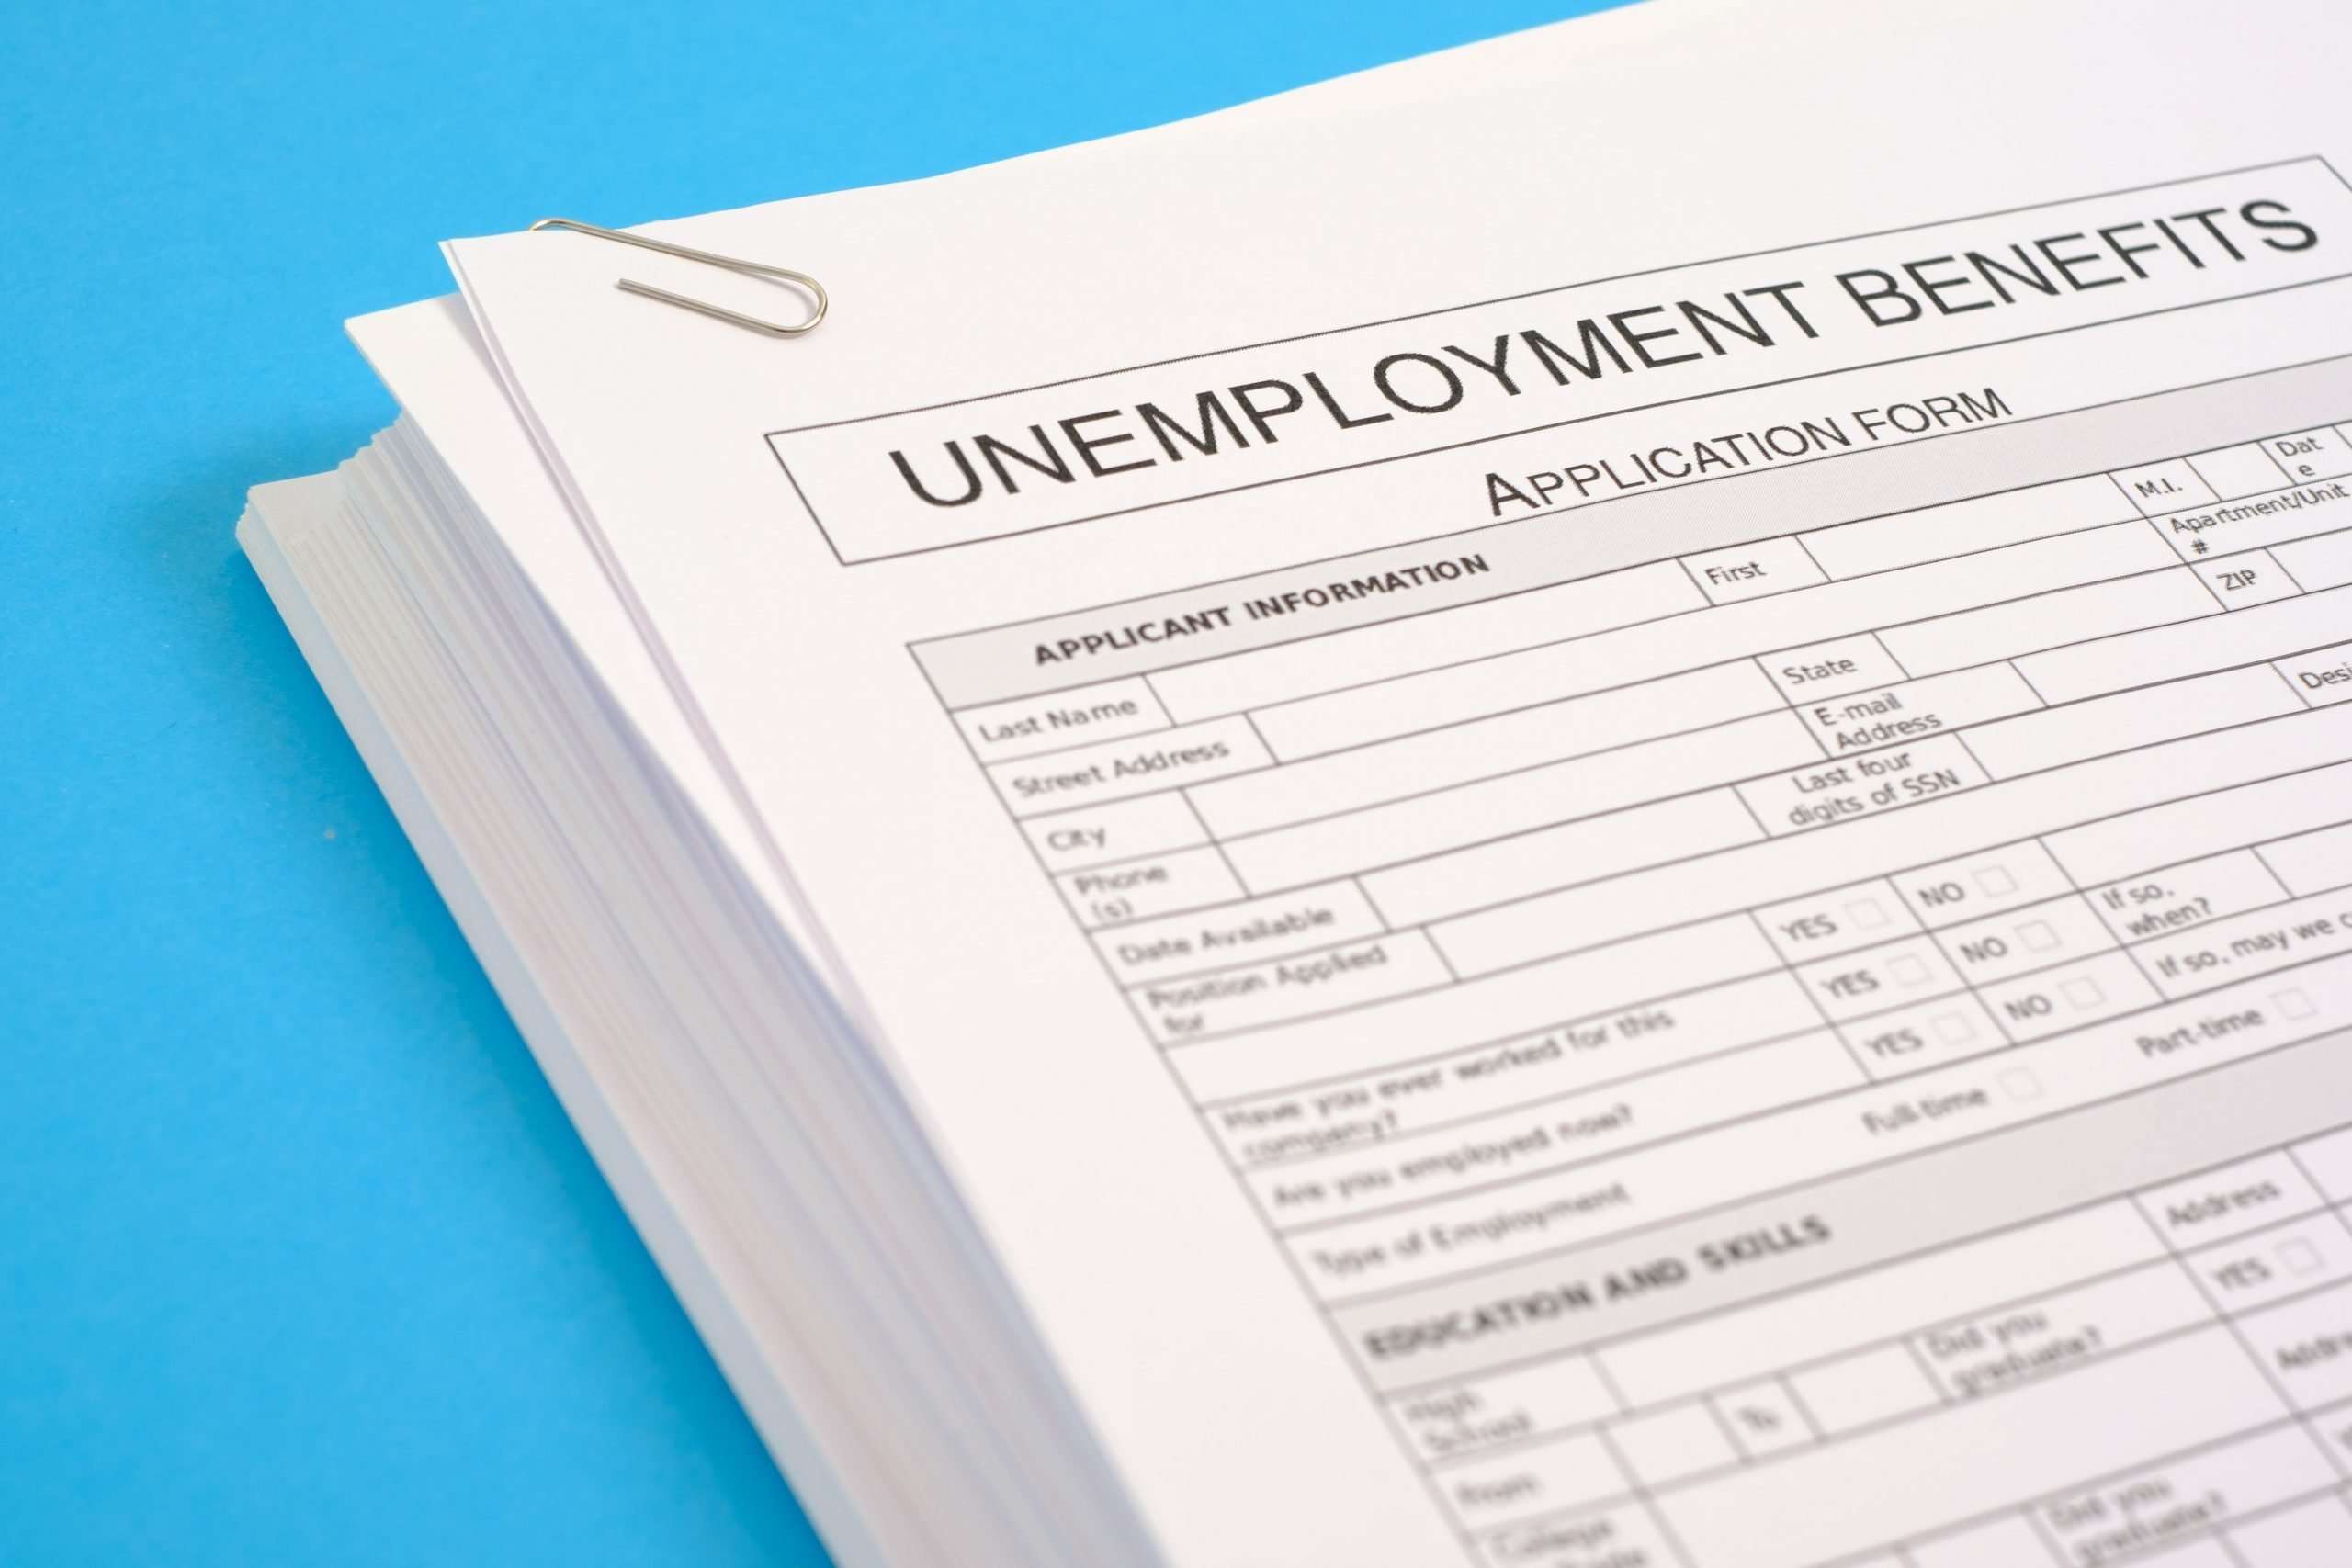 How Much Can You Get from Unemployment Benefits?